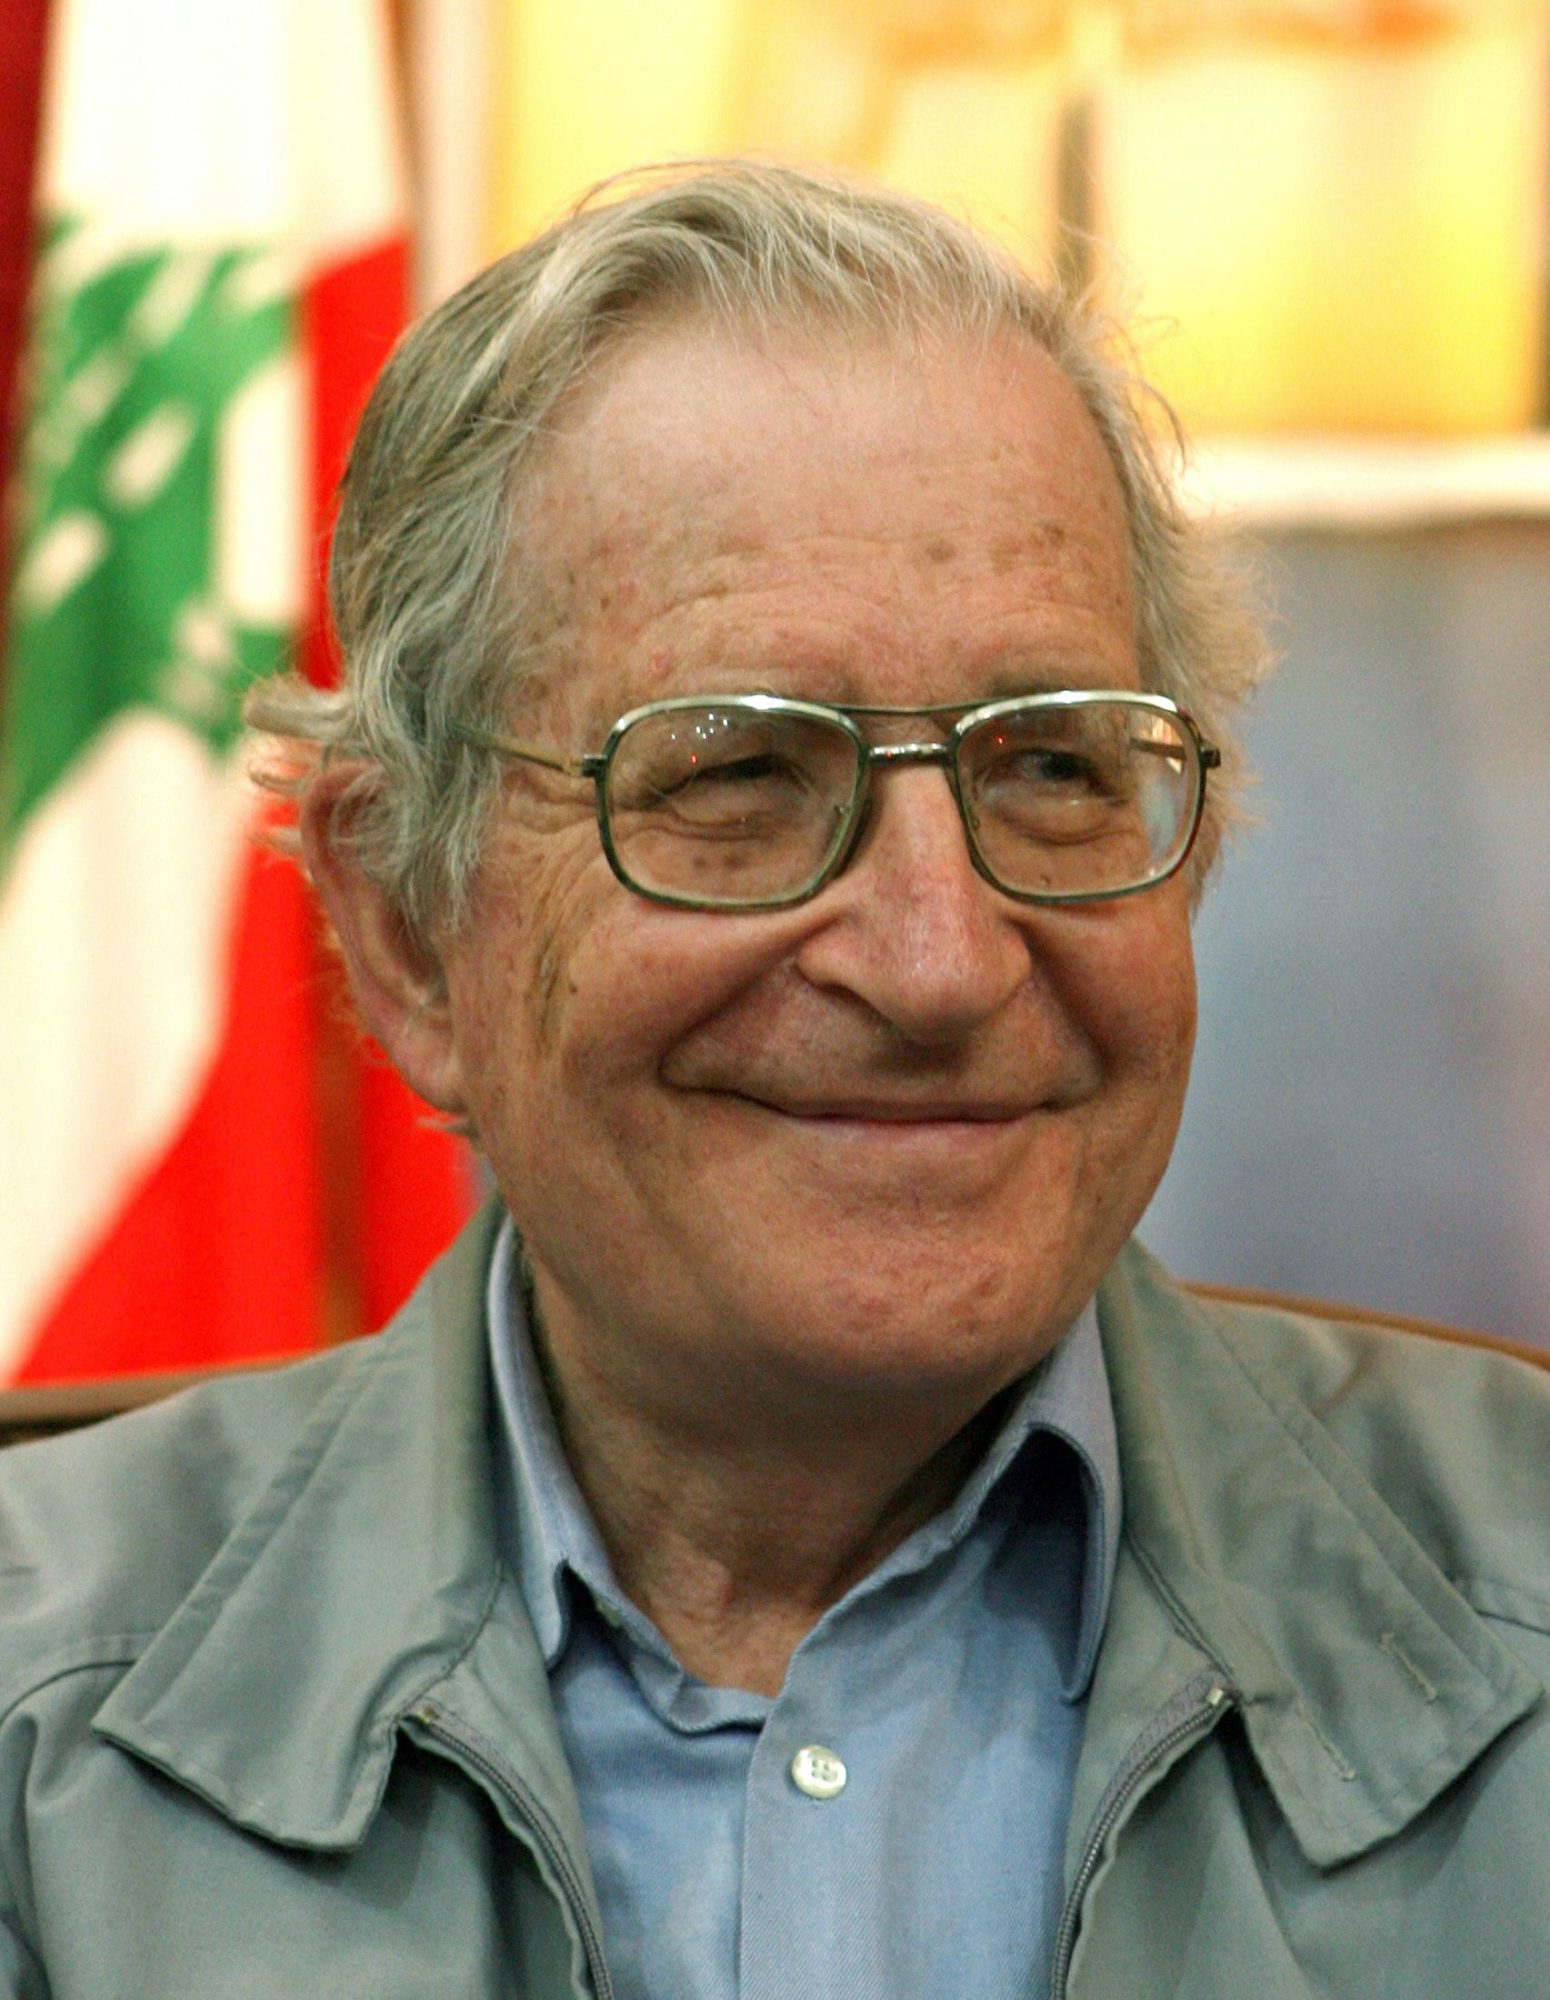 Academic and linguist Noam Chomsky speaks to reporters during his visit to a former Israeli prison in al-Kiam village in south Lebanon near the border with Israel May 13, 2006.